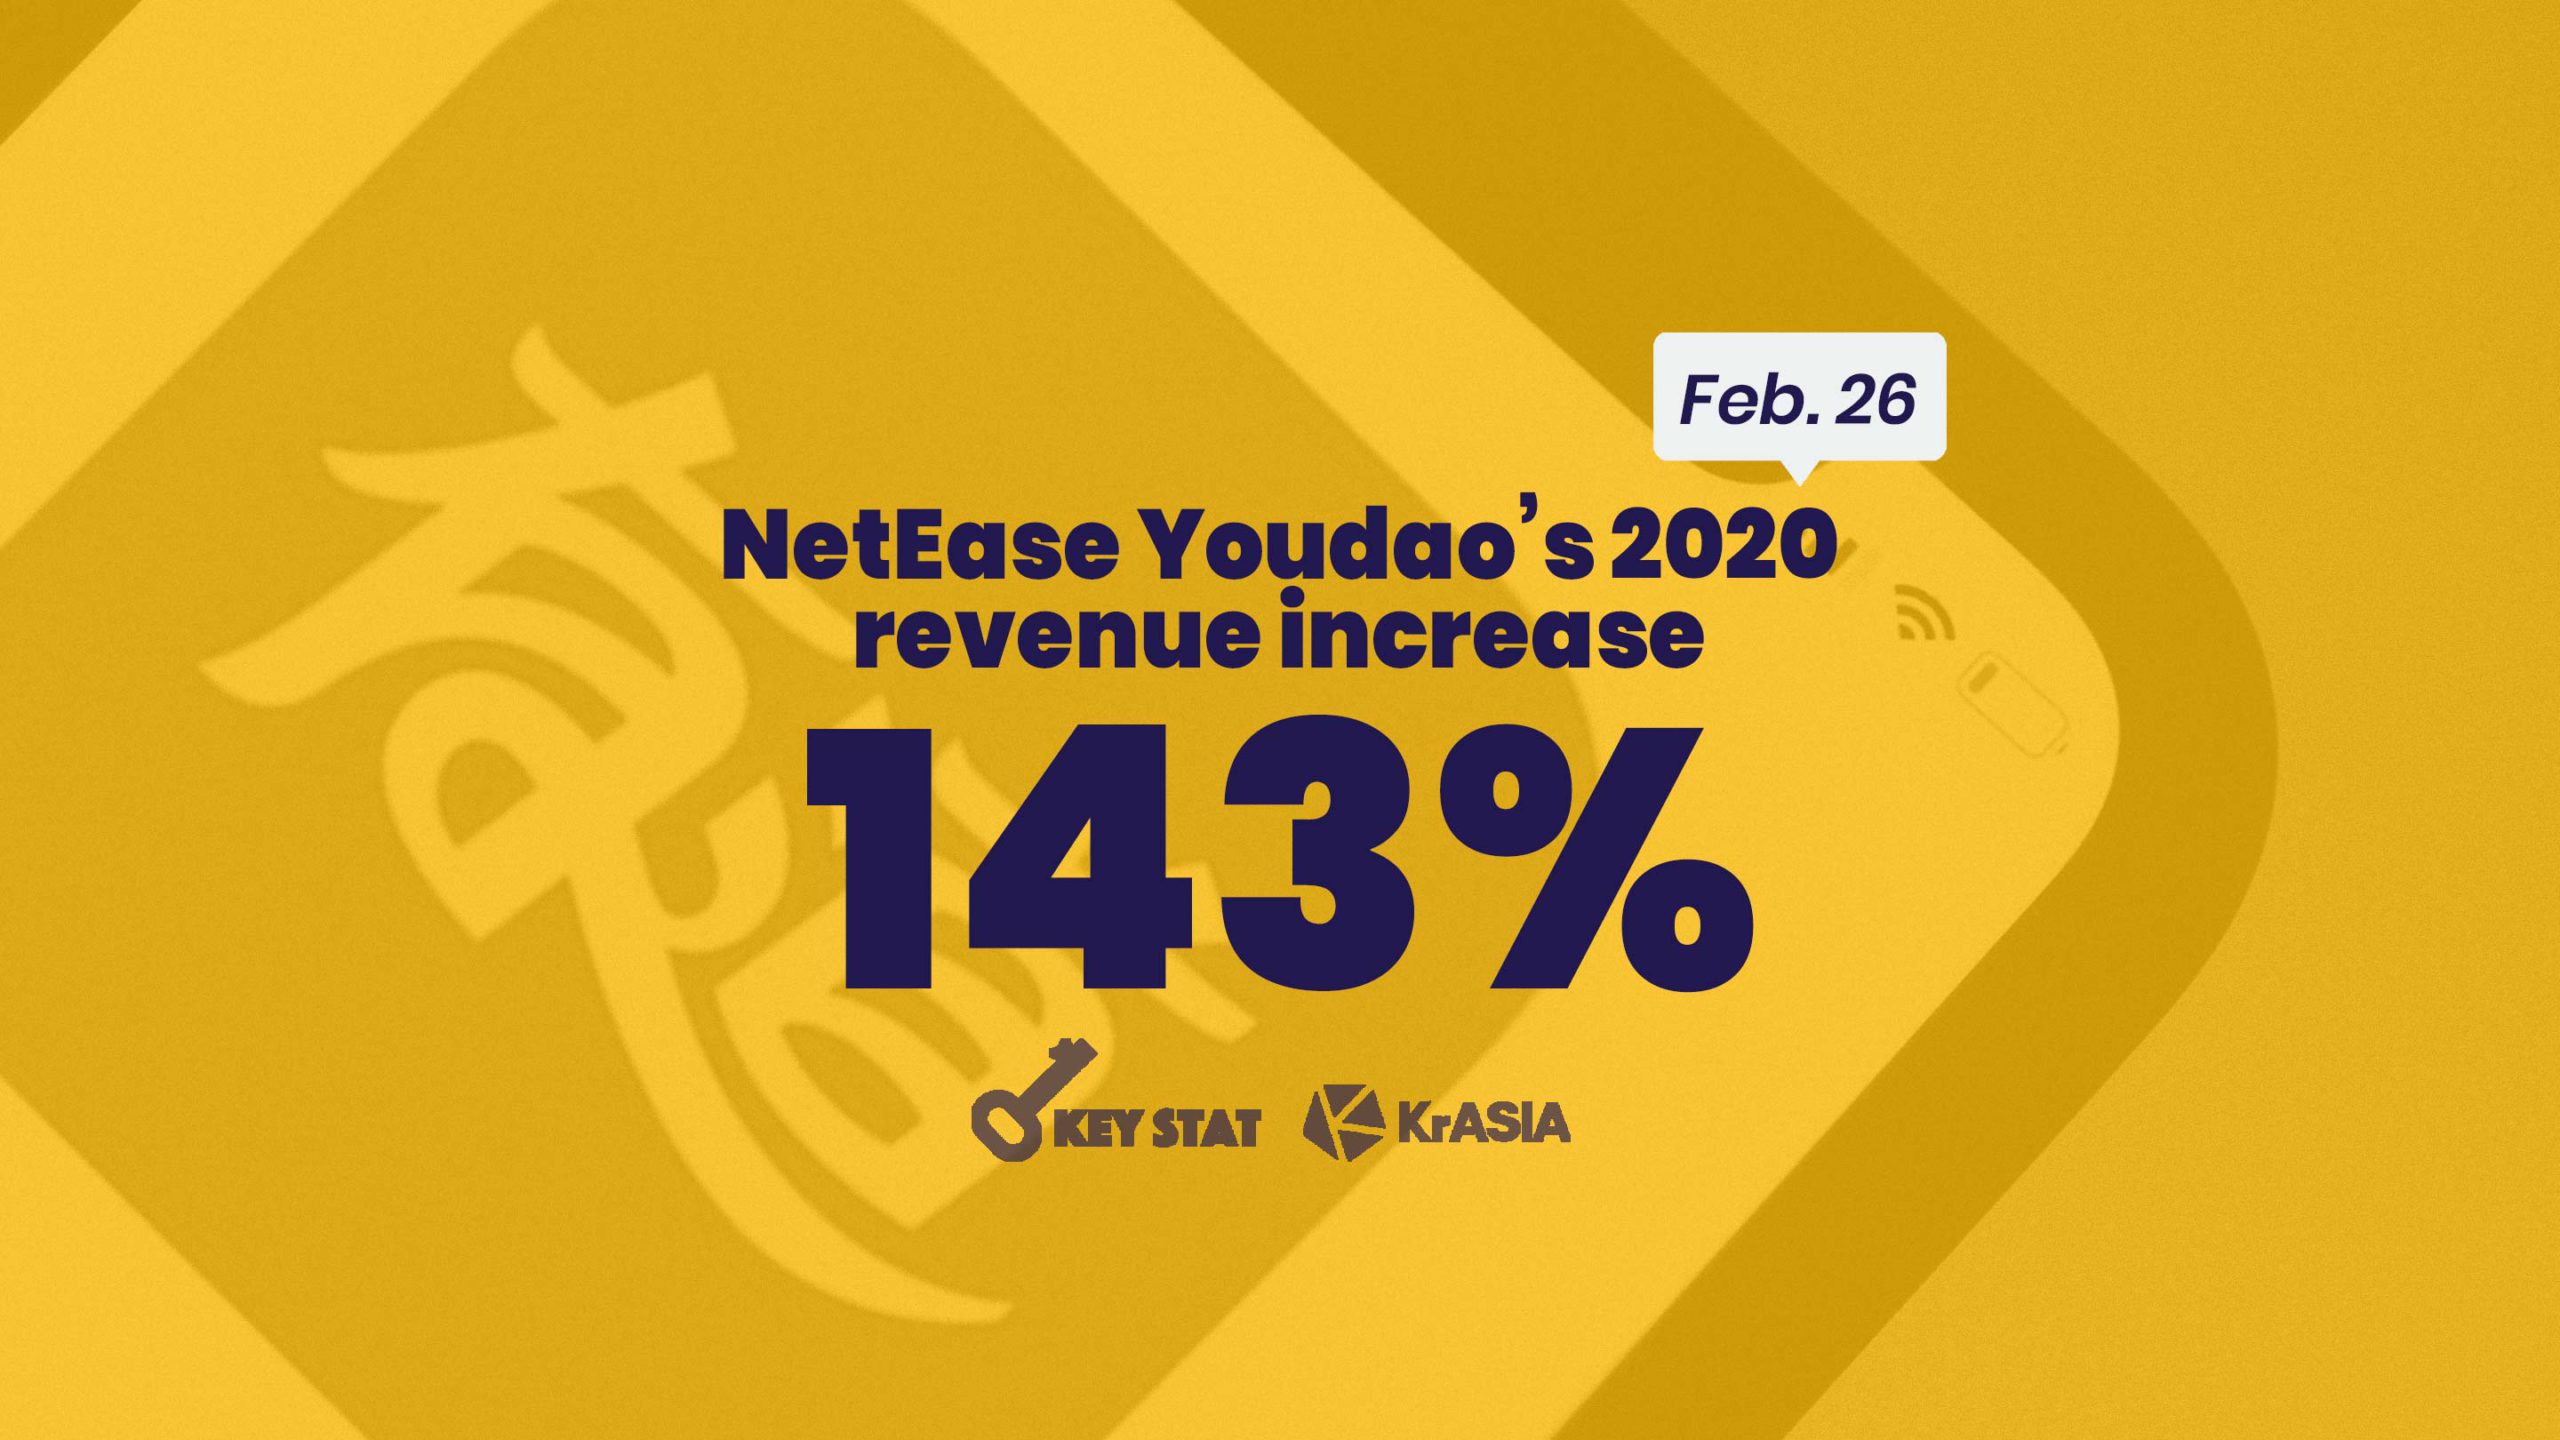 KEY STAT | Edtech Youdao doubles its revenue in 2020 in robust online market